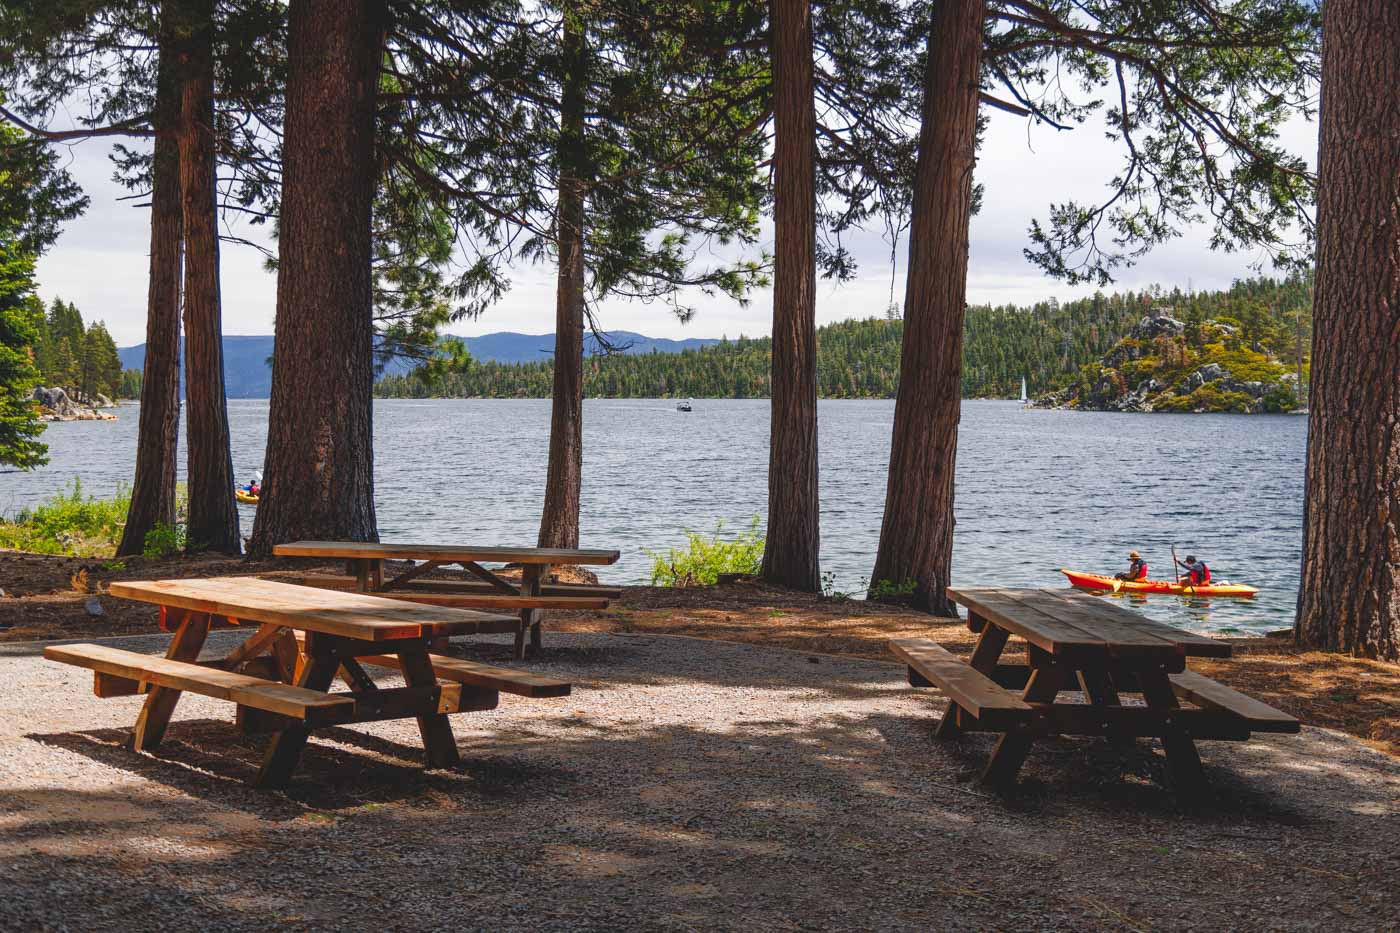 Three empty picnic tables in the day use area of Emerald Bay while kayakers row past in the background on the lake.